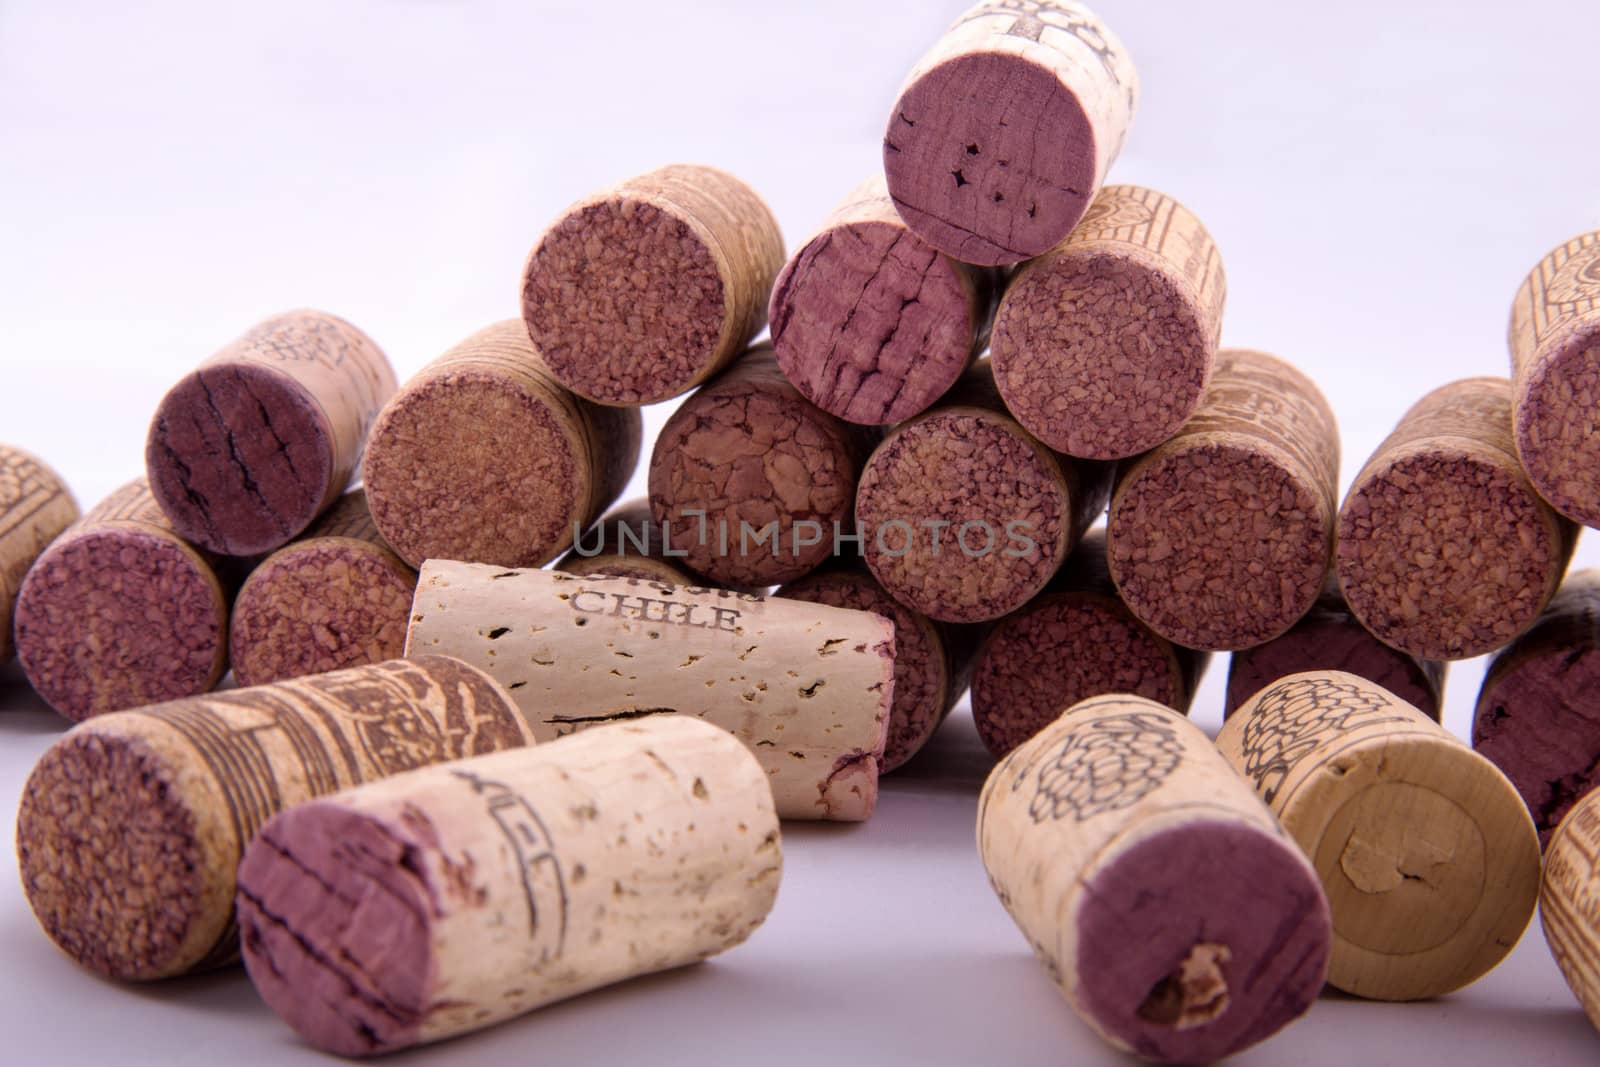 Bunch of corks with different designs by rawstylepictures